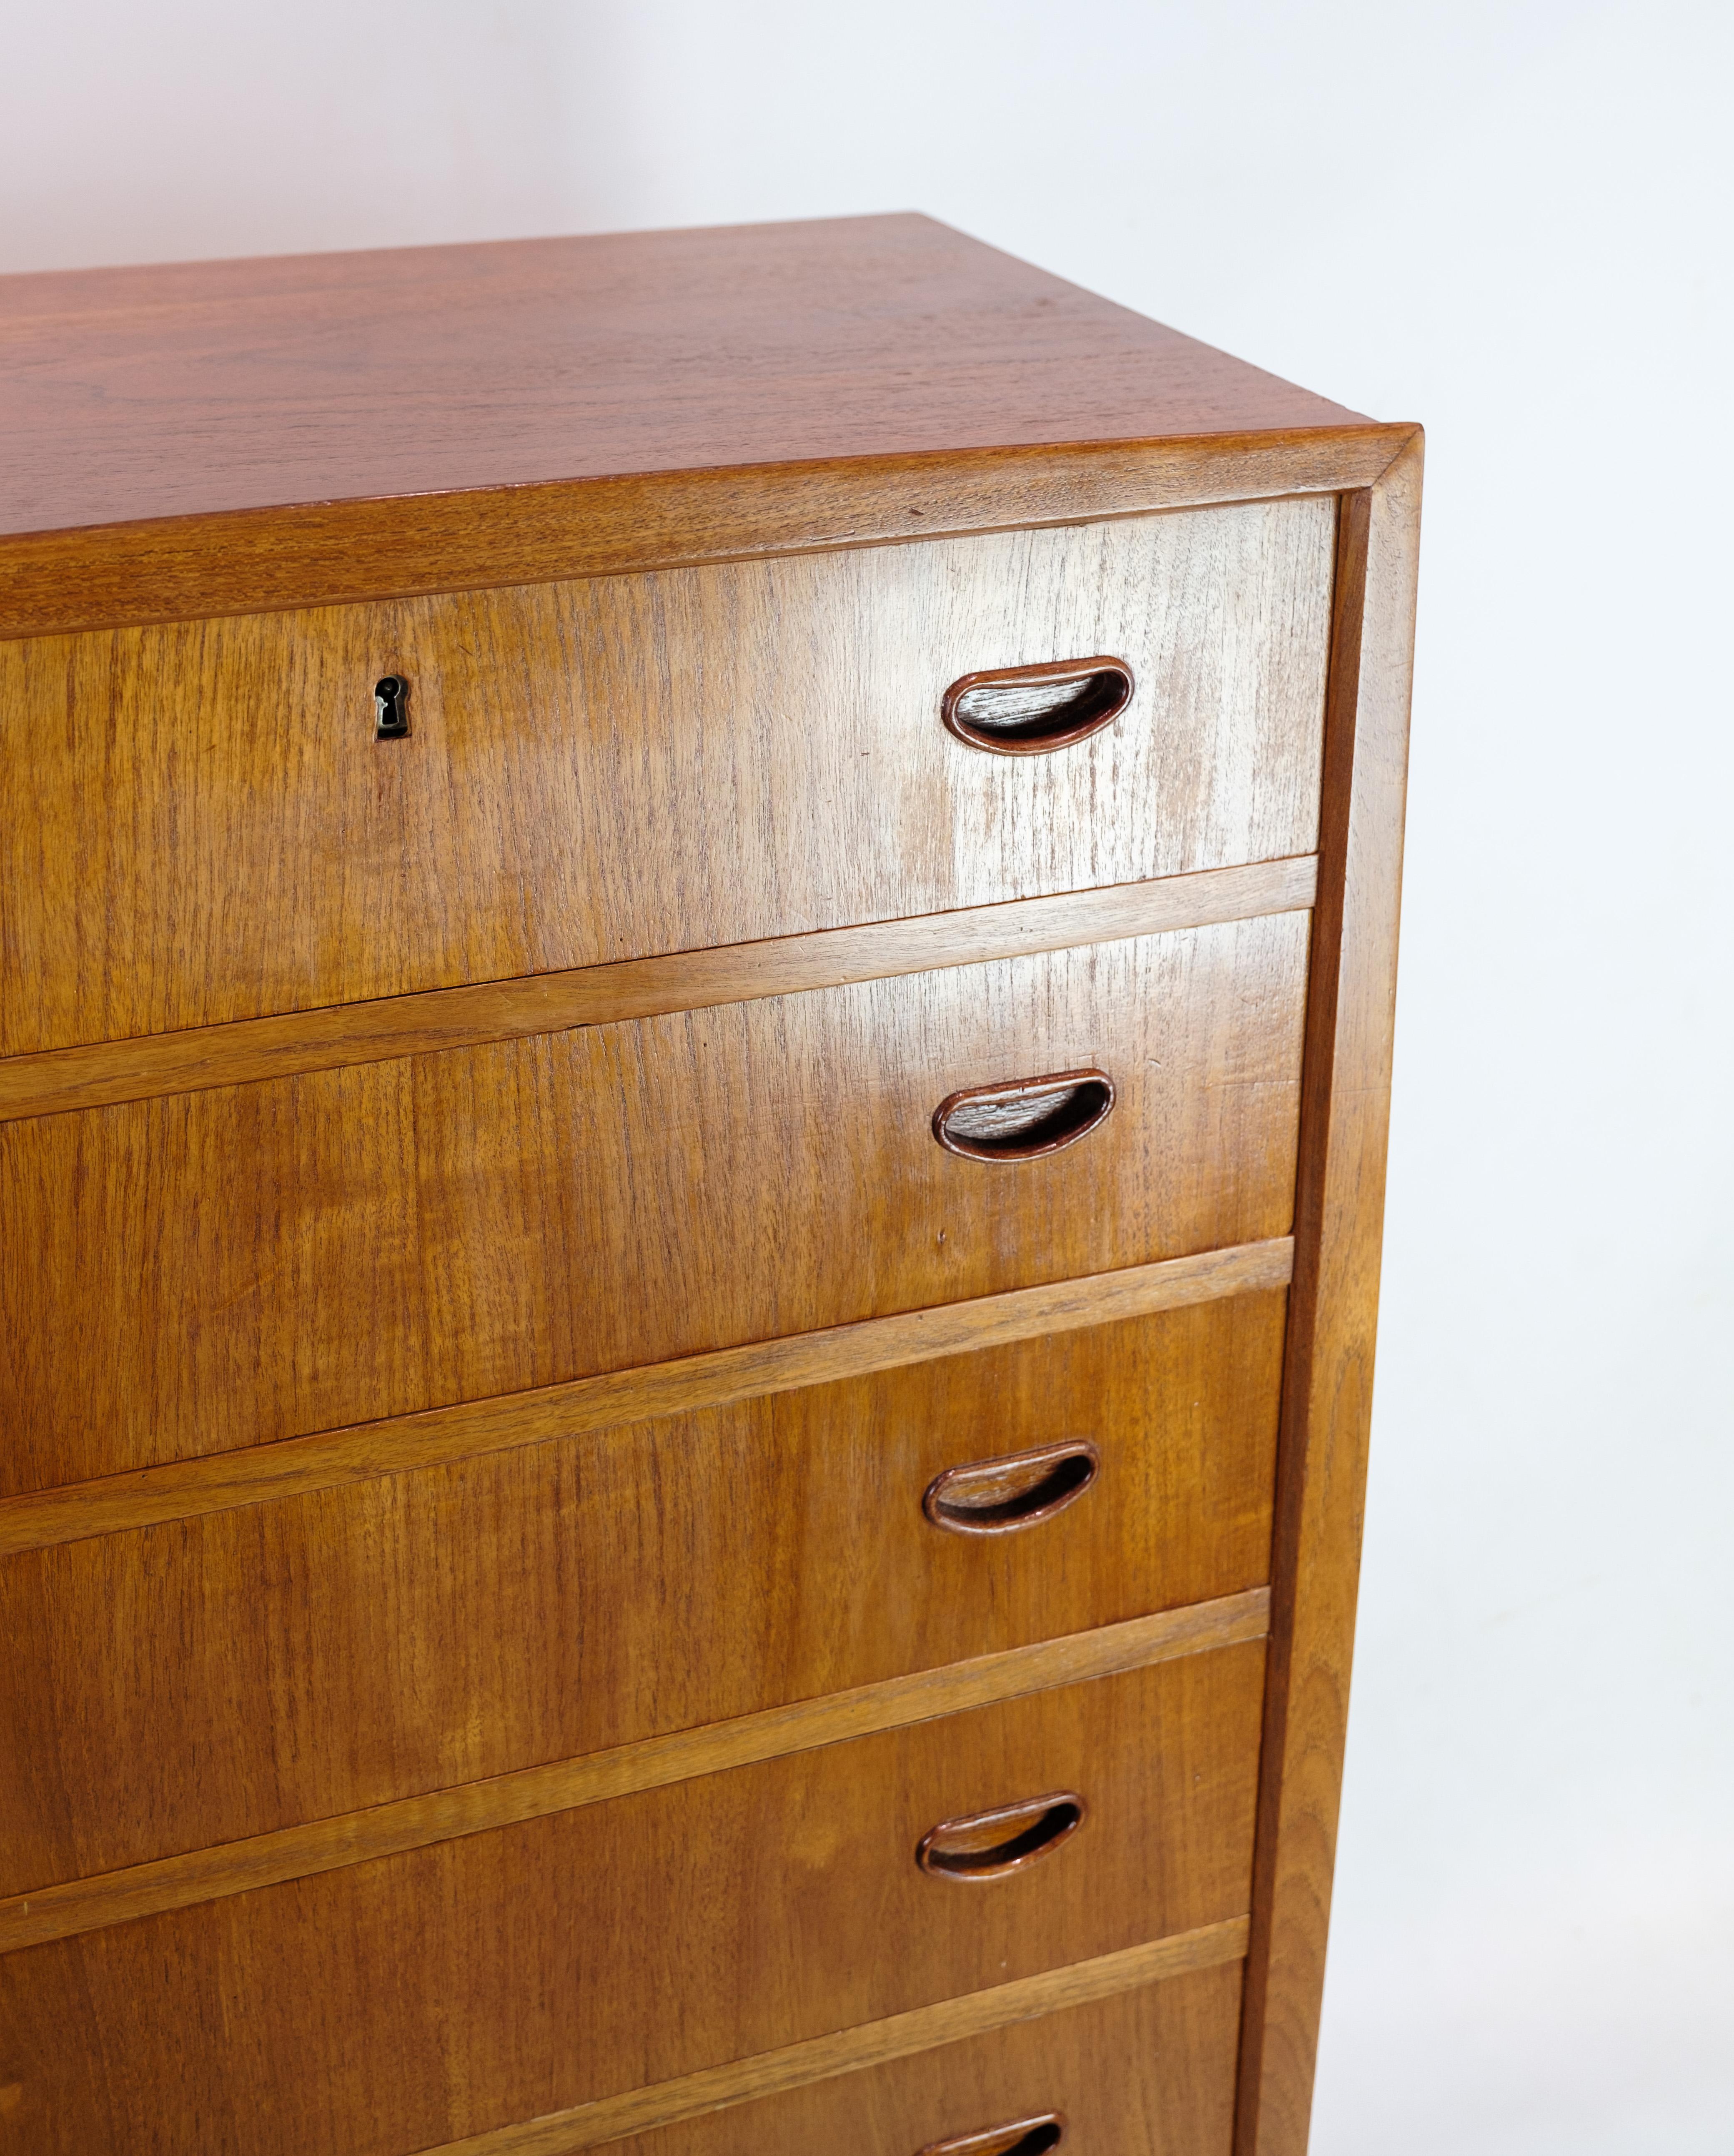 A teak dresser of Danish design from the 1960s is a lovely example of mid-century modern furniture style that is still popular today.

The teak wood is known for its natural beauty, warm colors and durability, which made it a preferred material for